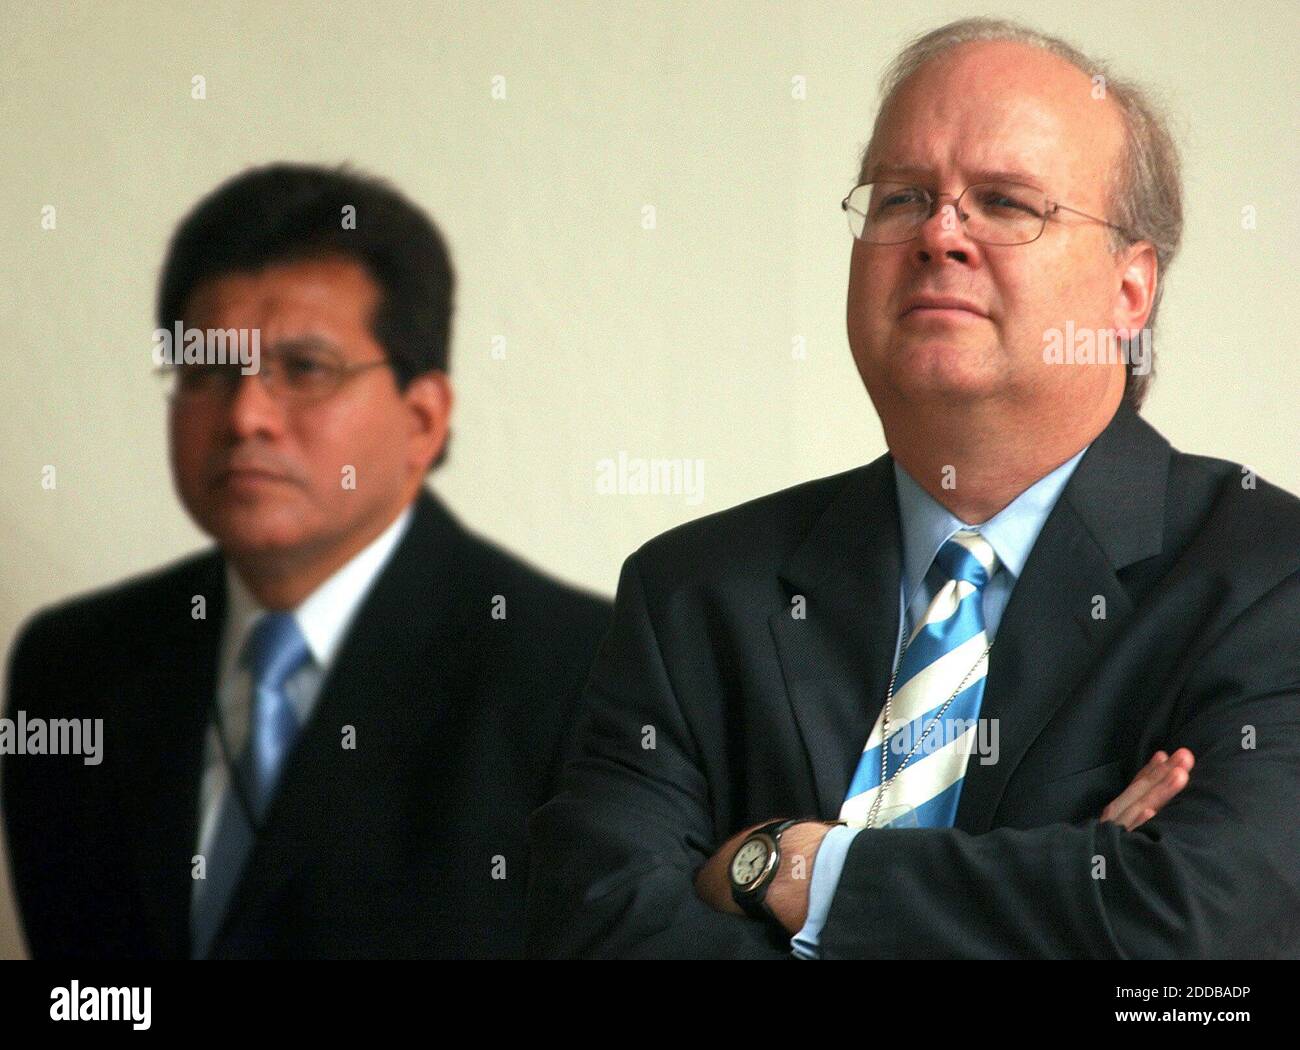 NO FILM, NO VIDEO, NO TV, NO DOCUMENTARY - Karl Rove, a top White House advisor, right, and White House Counsel Albert Gonzales listen as President George W. Bush addresses the war in Iraq as well as the economy during a news conference in the Rose Garden at the White House on Wednesday, July 30, 2003. Photo by George Bridges/KRT/ABACA Stock Photo